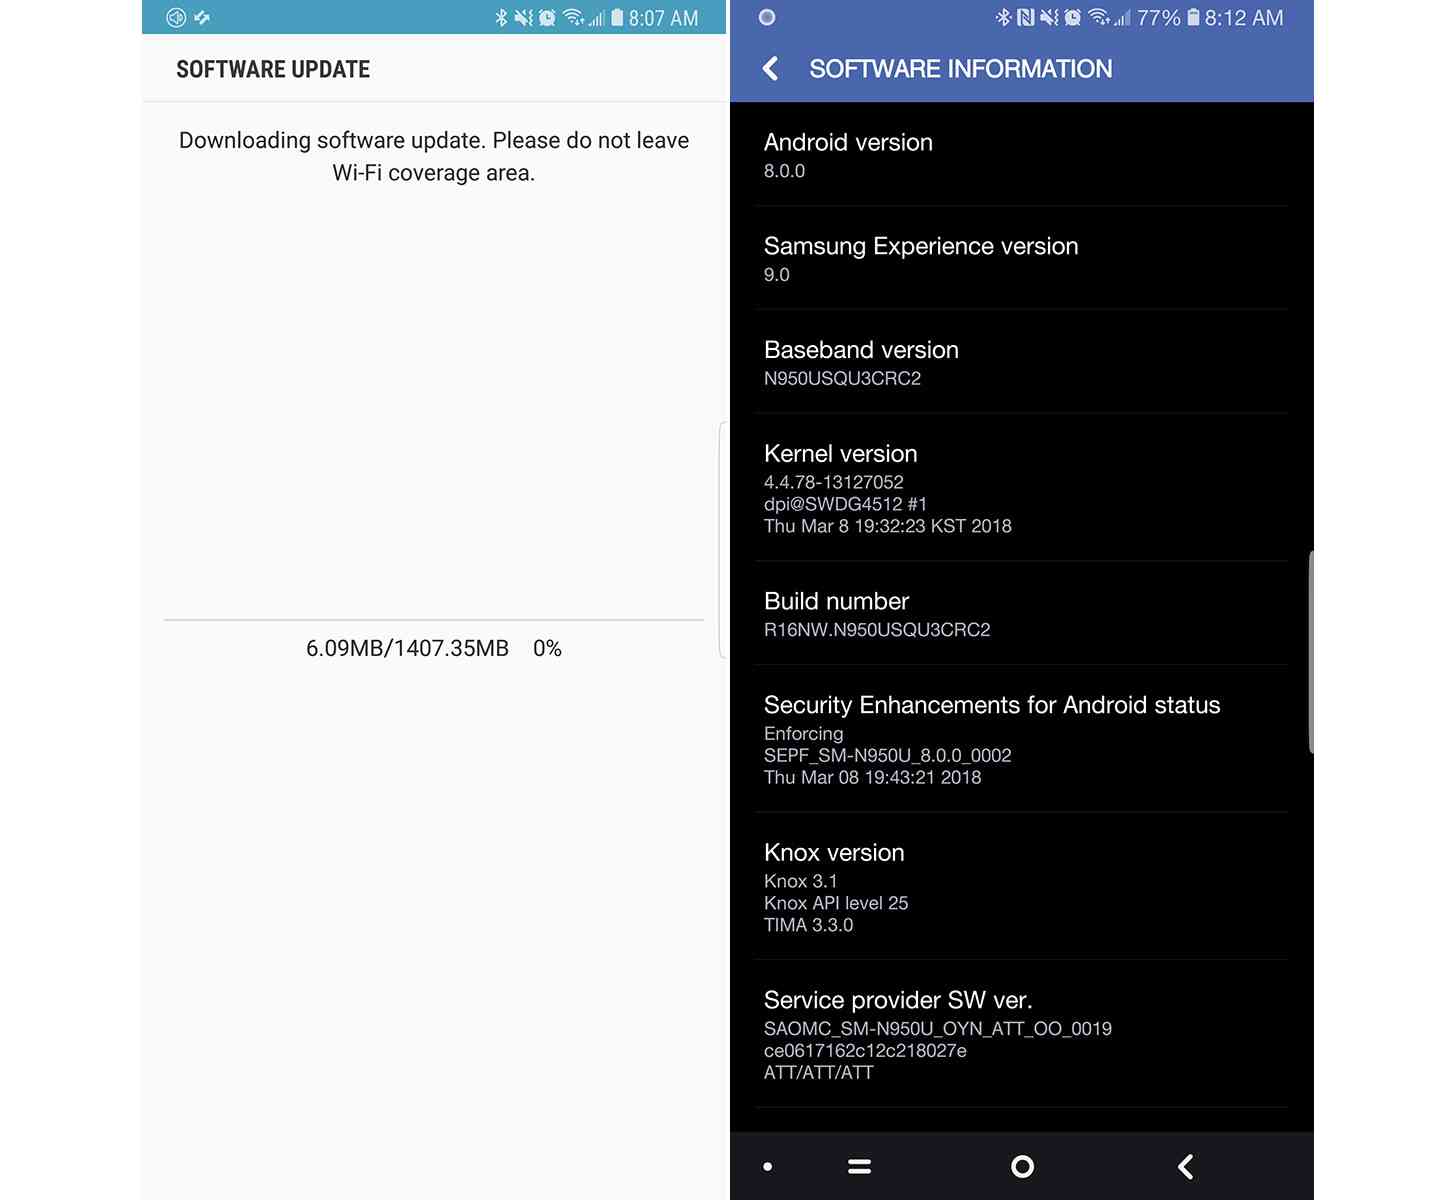 AT&T Galaxy Note 8 Android 8.0 Oreo update